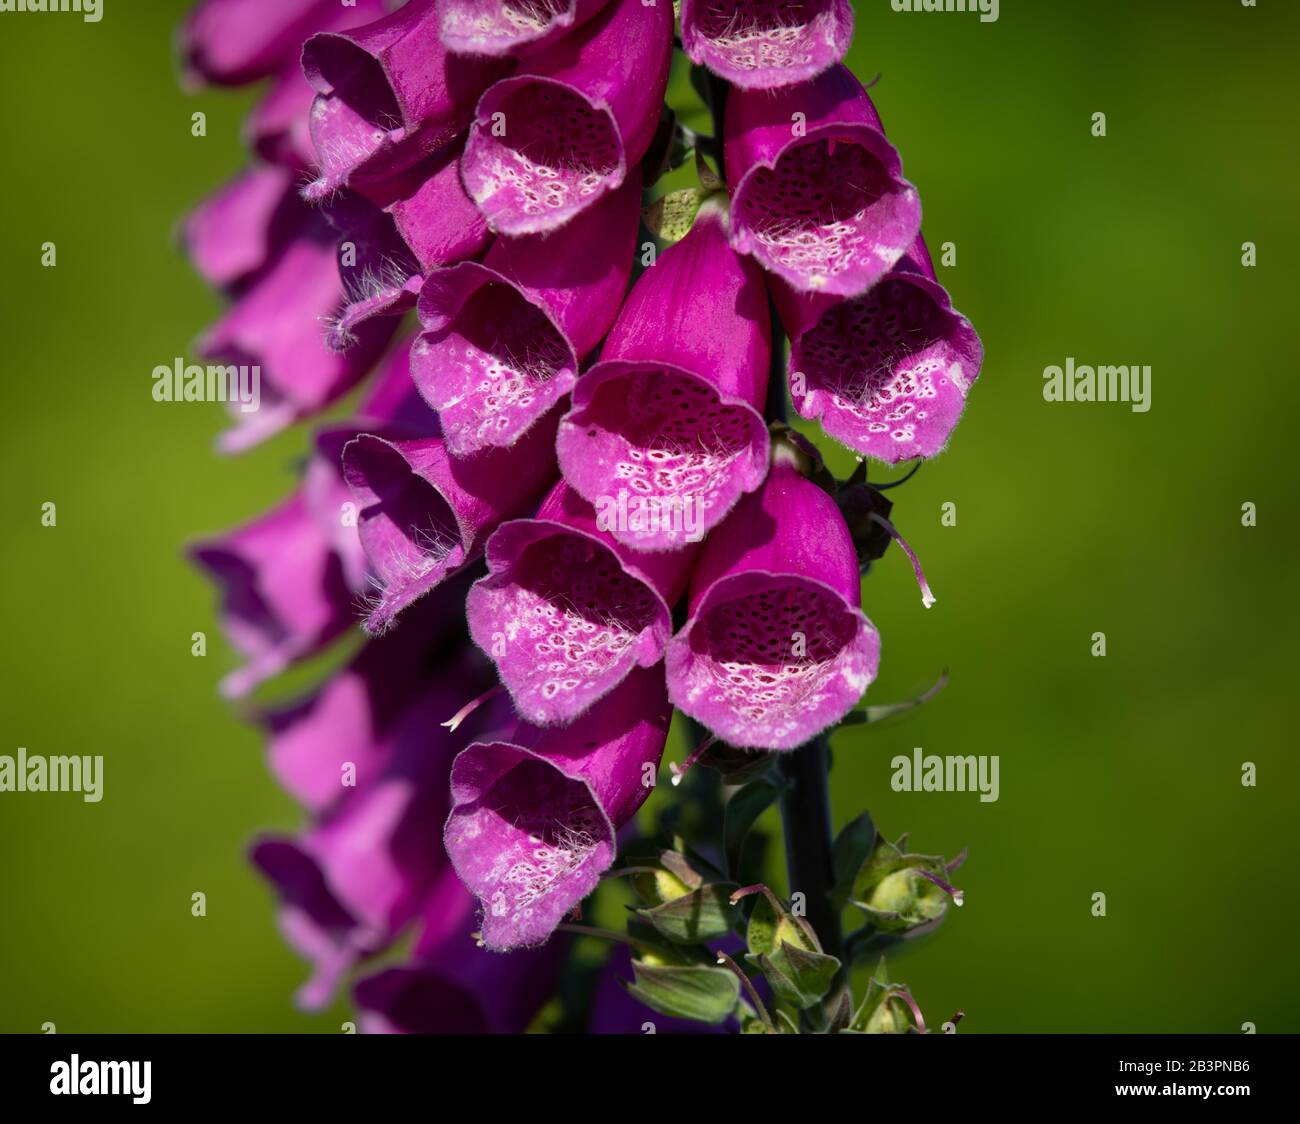 Digitalis, or foxglove flower head, shot in an English cottage garden showing flowers in closeup against a blurred green background Stock Photo